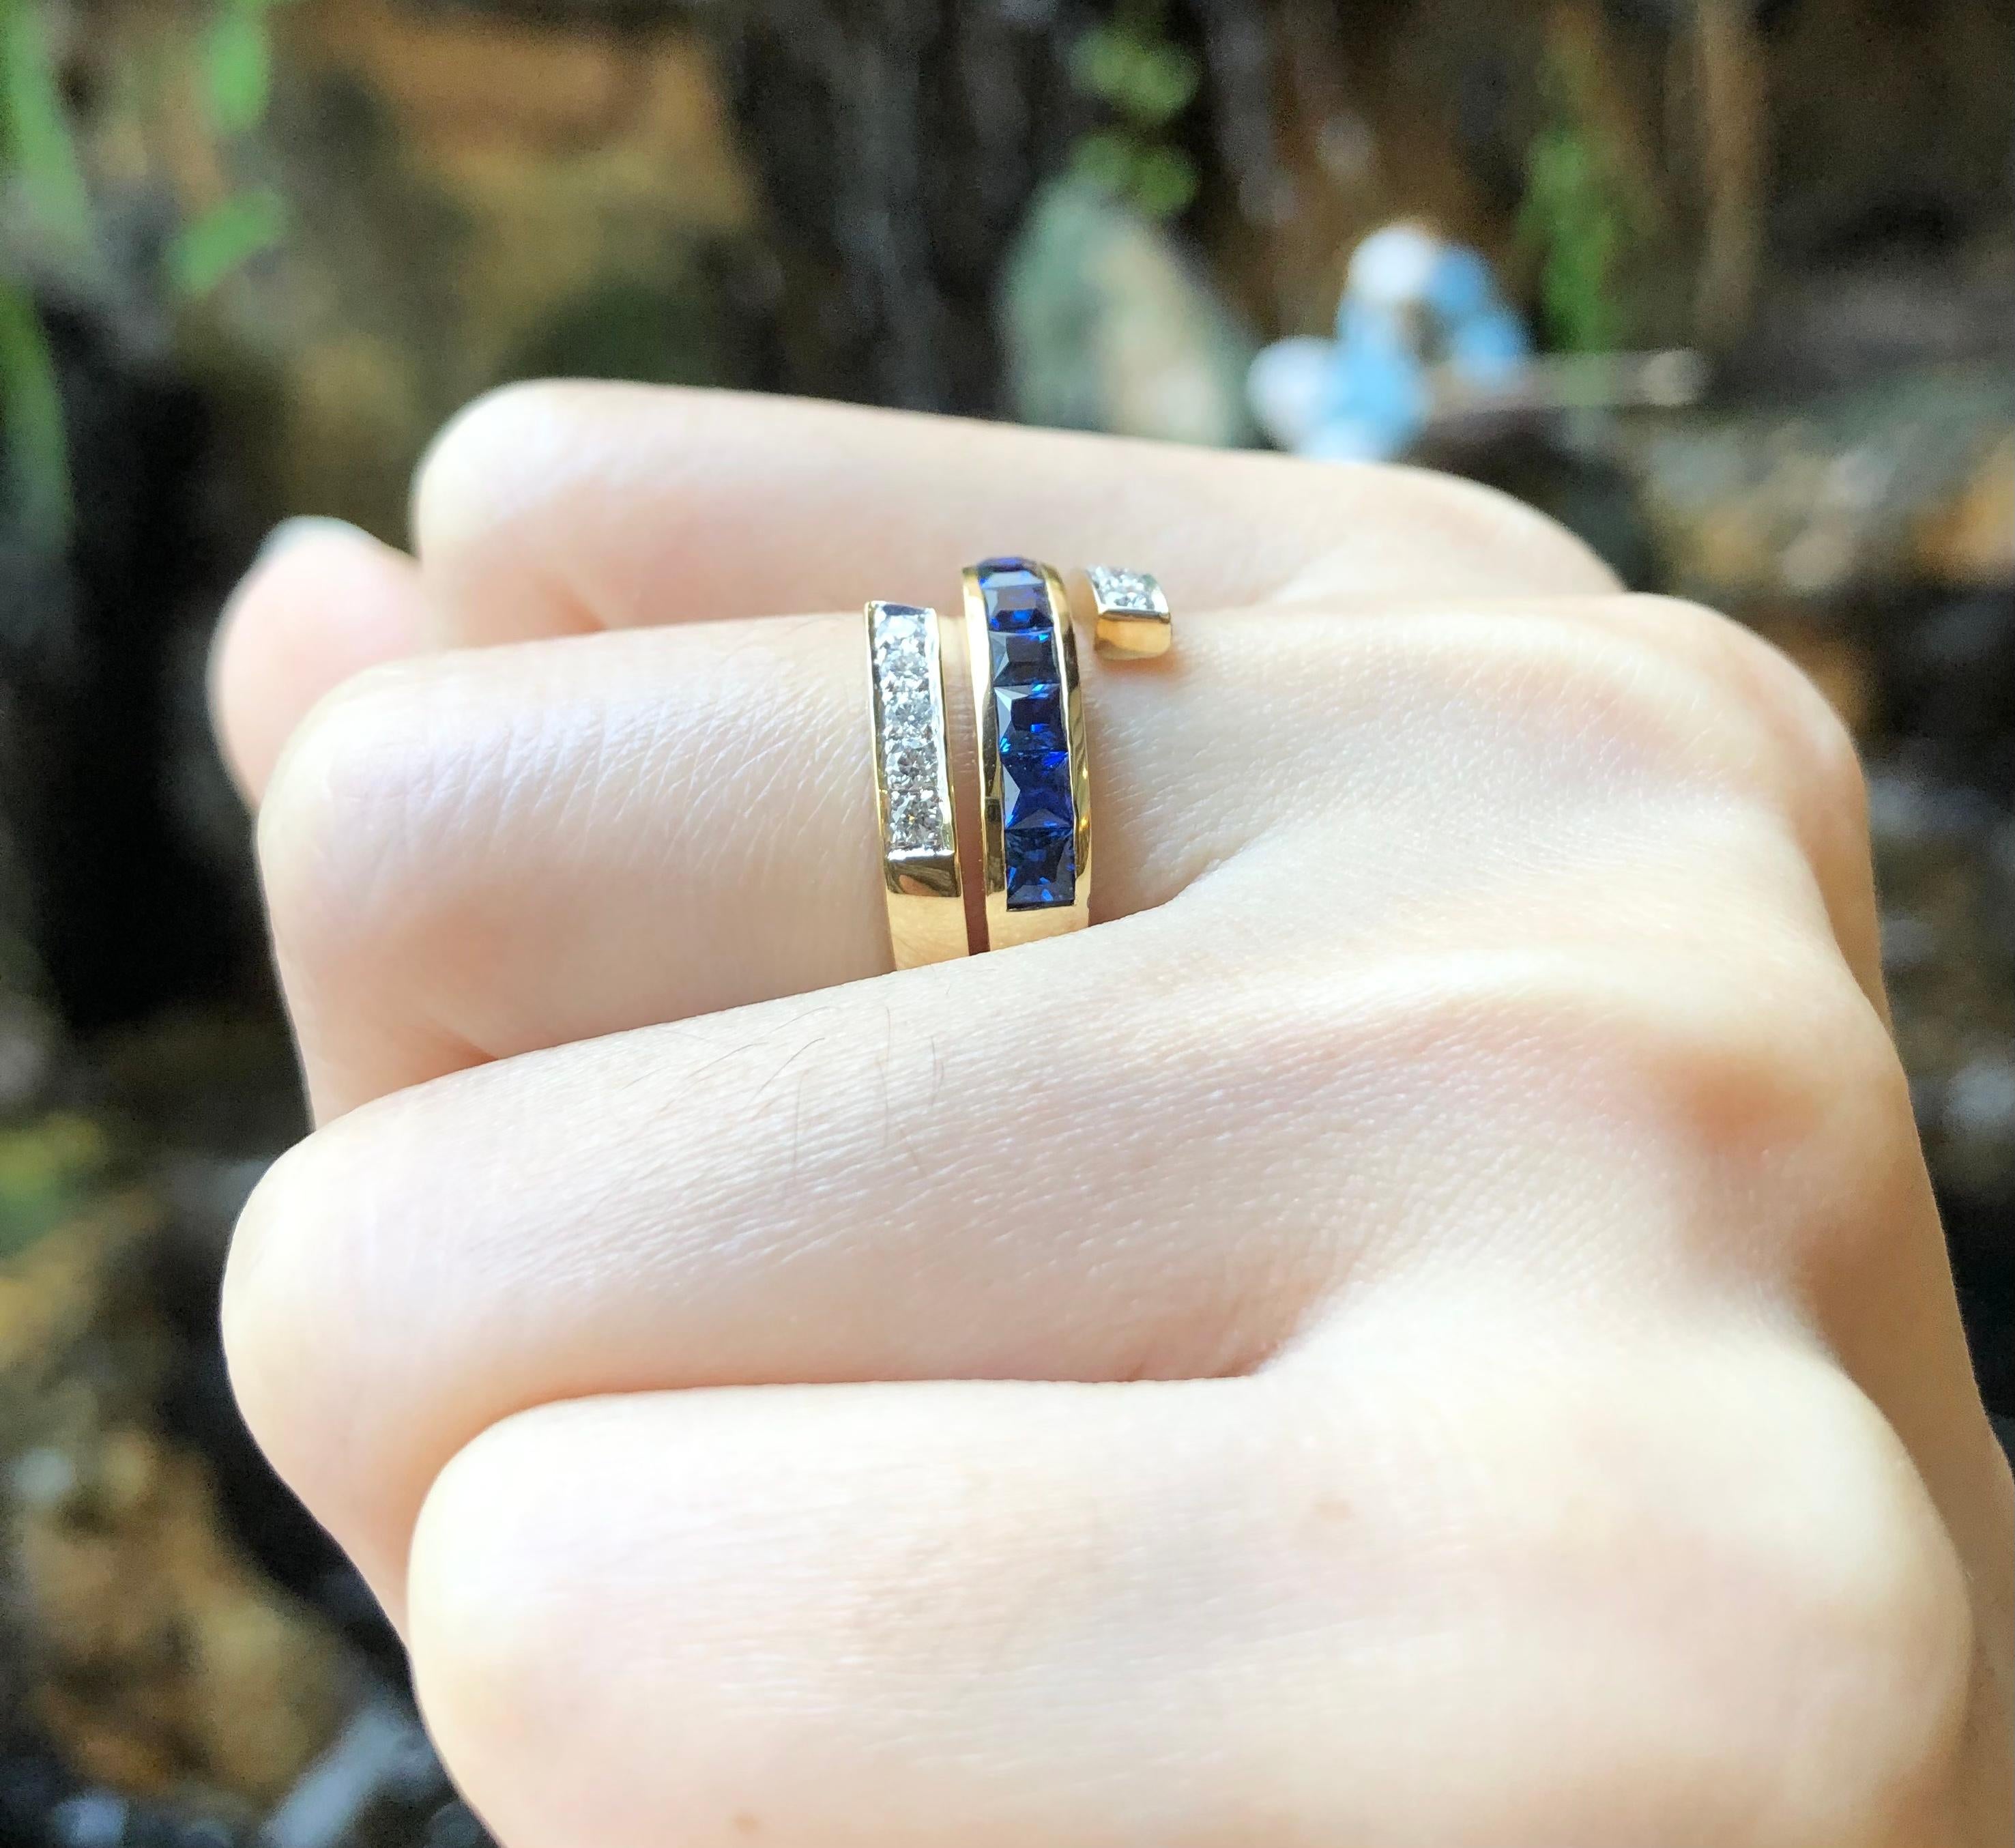 Blue Sapphire 1.46 carats with Diamond 0.24 carat Ring set in 18 Karat Gold Settings

Width:  2.0 cm 
Length: 1.3 cm
Ring Size: 53
Total Weight: 9.04 grams


